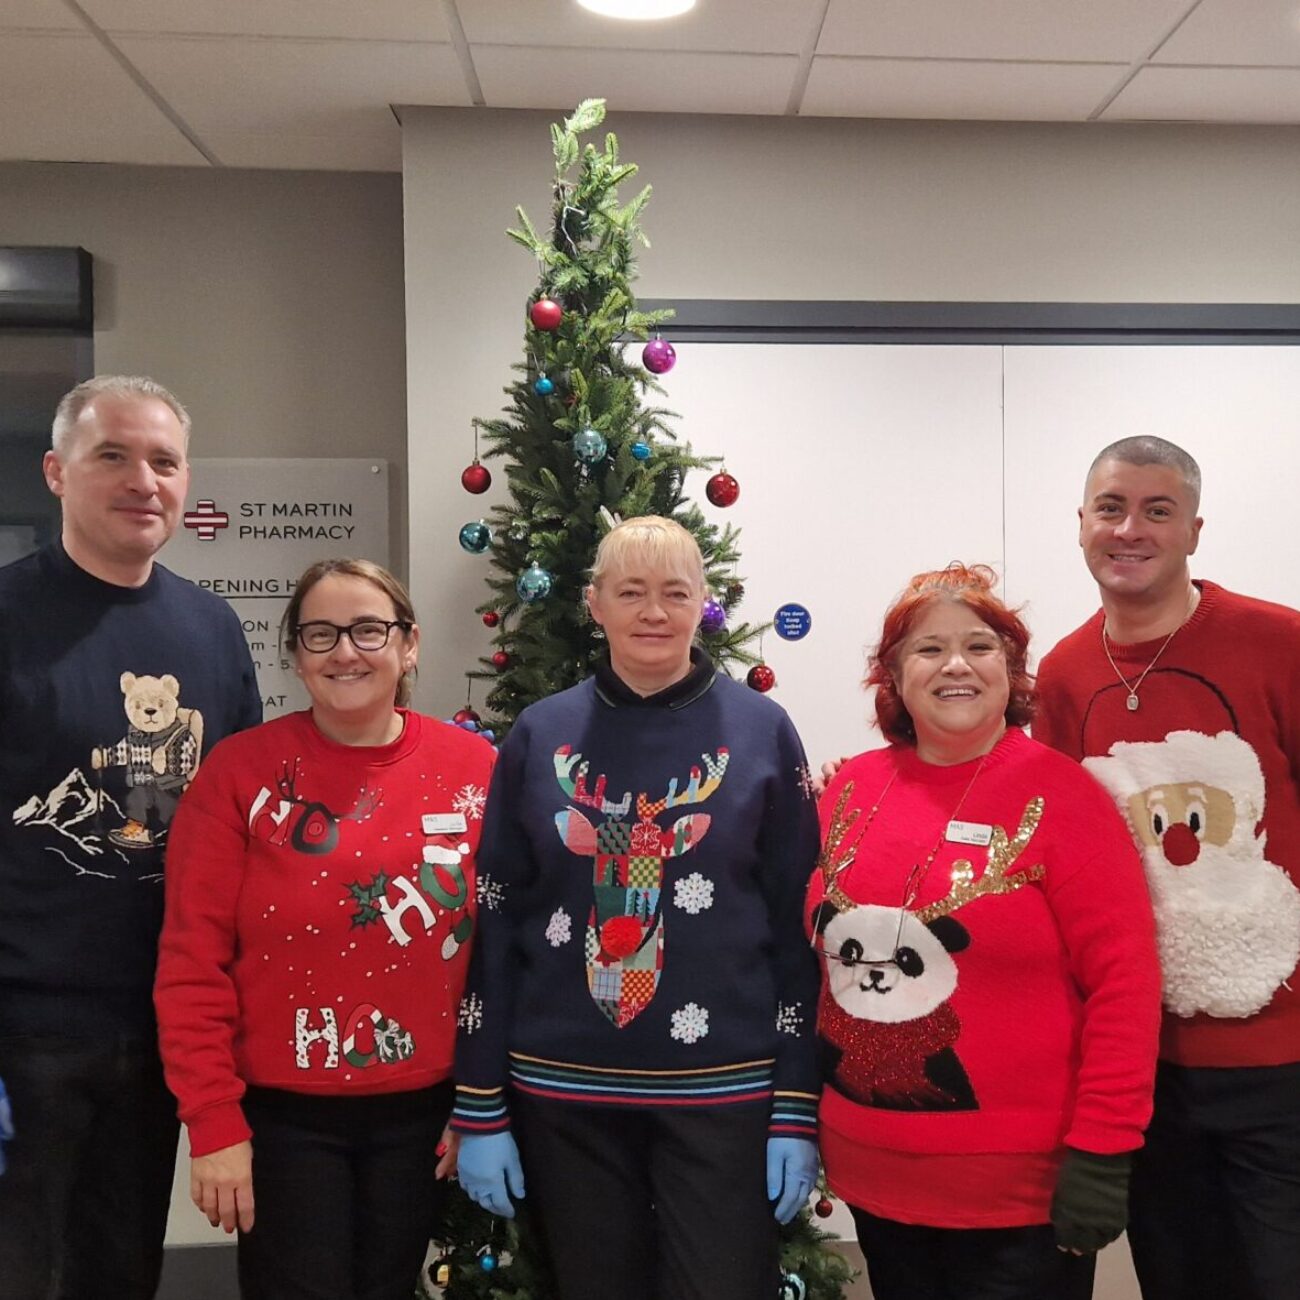 The team in their Christmas jumpers